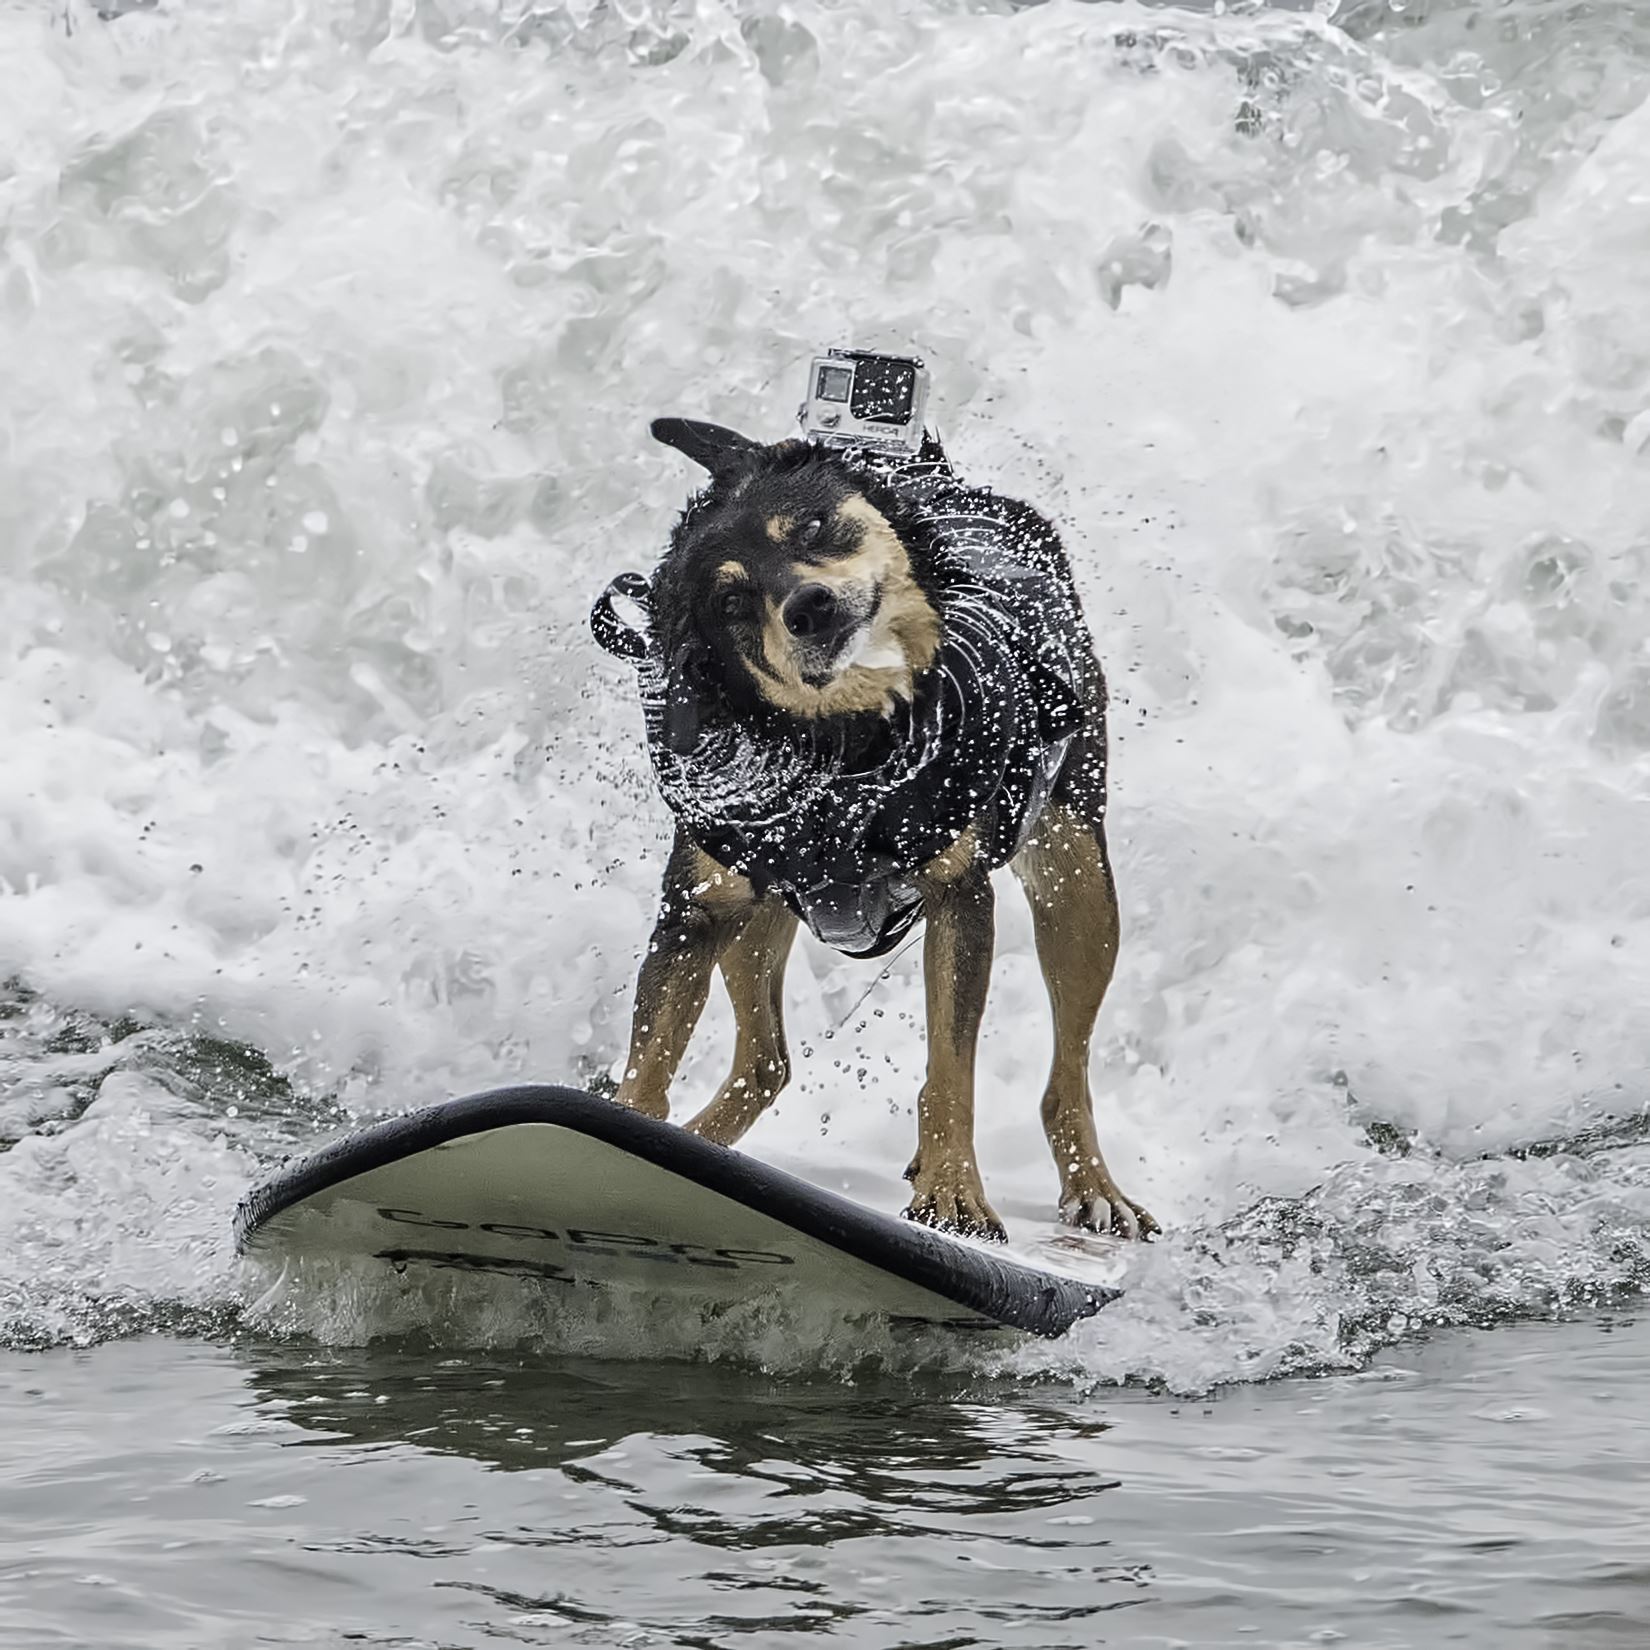 Abby, World Champion Dog Surfer - Abby, holder of the 2016 world record for length of solo surf ride by a dog by Denise Buckley Crawford